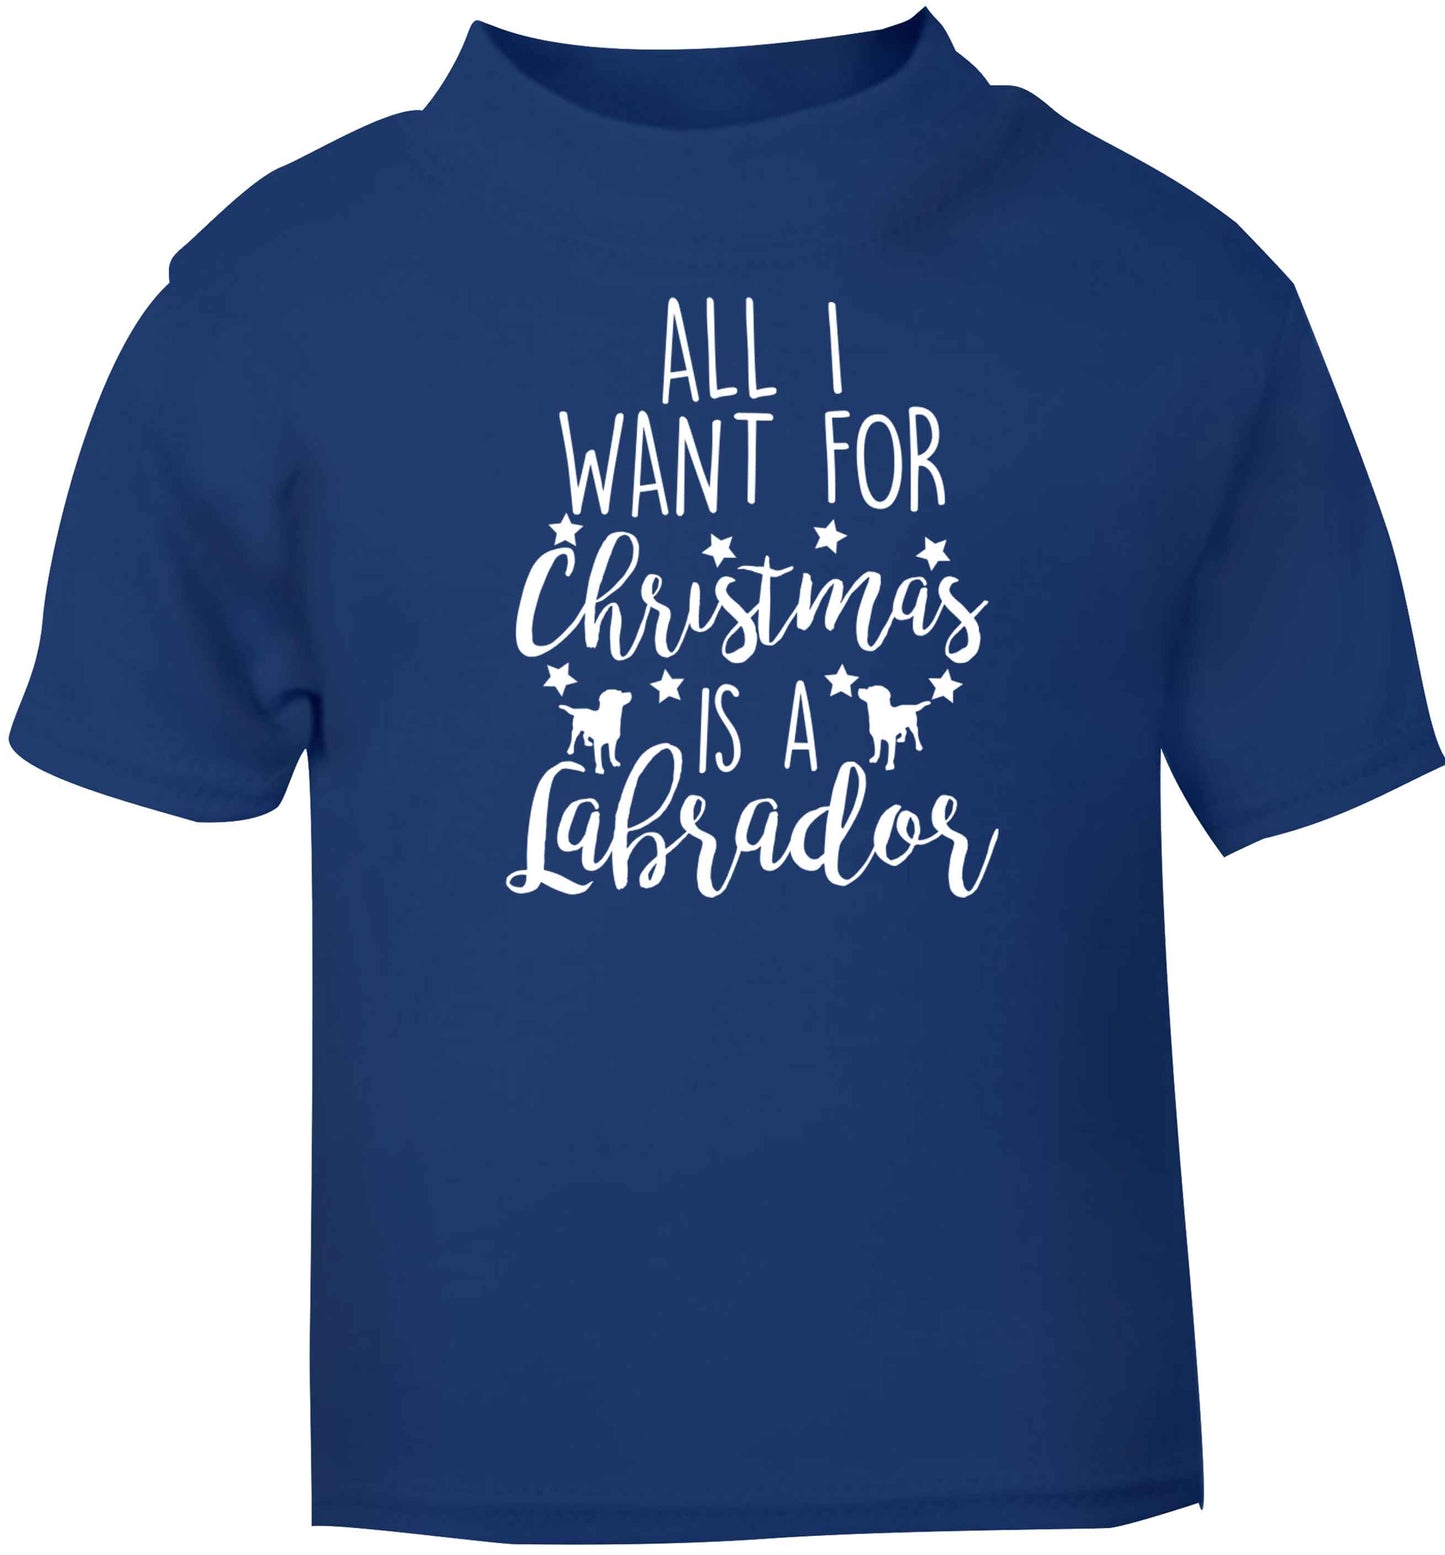 All I want for Christmas is a labrador blue baby toddler Tshirt 2 Years